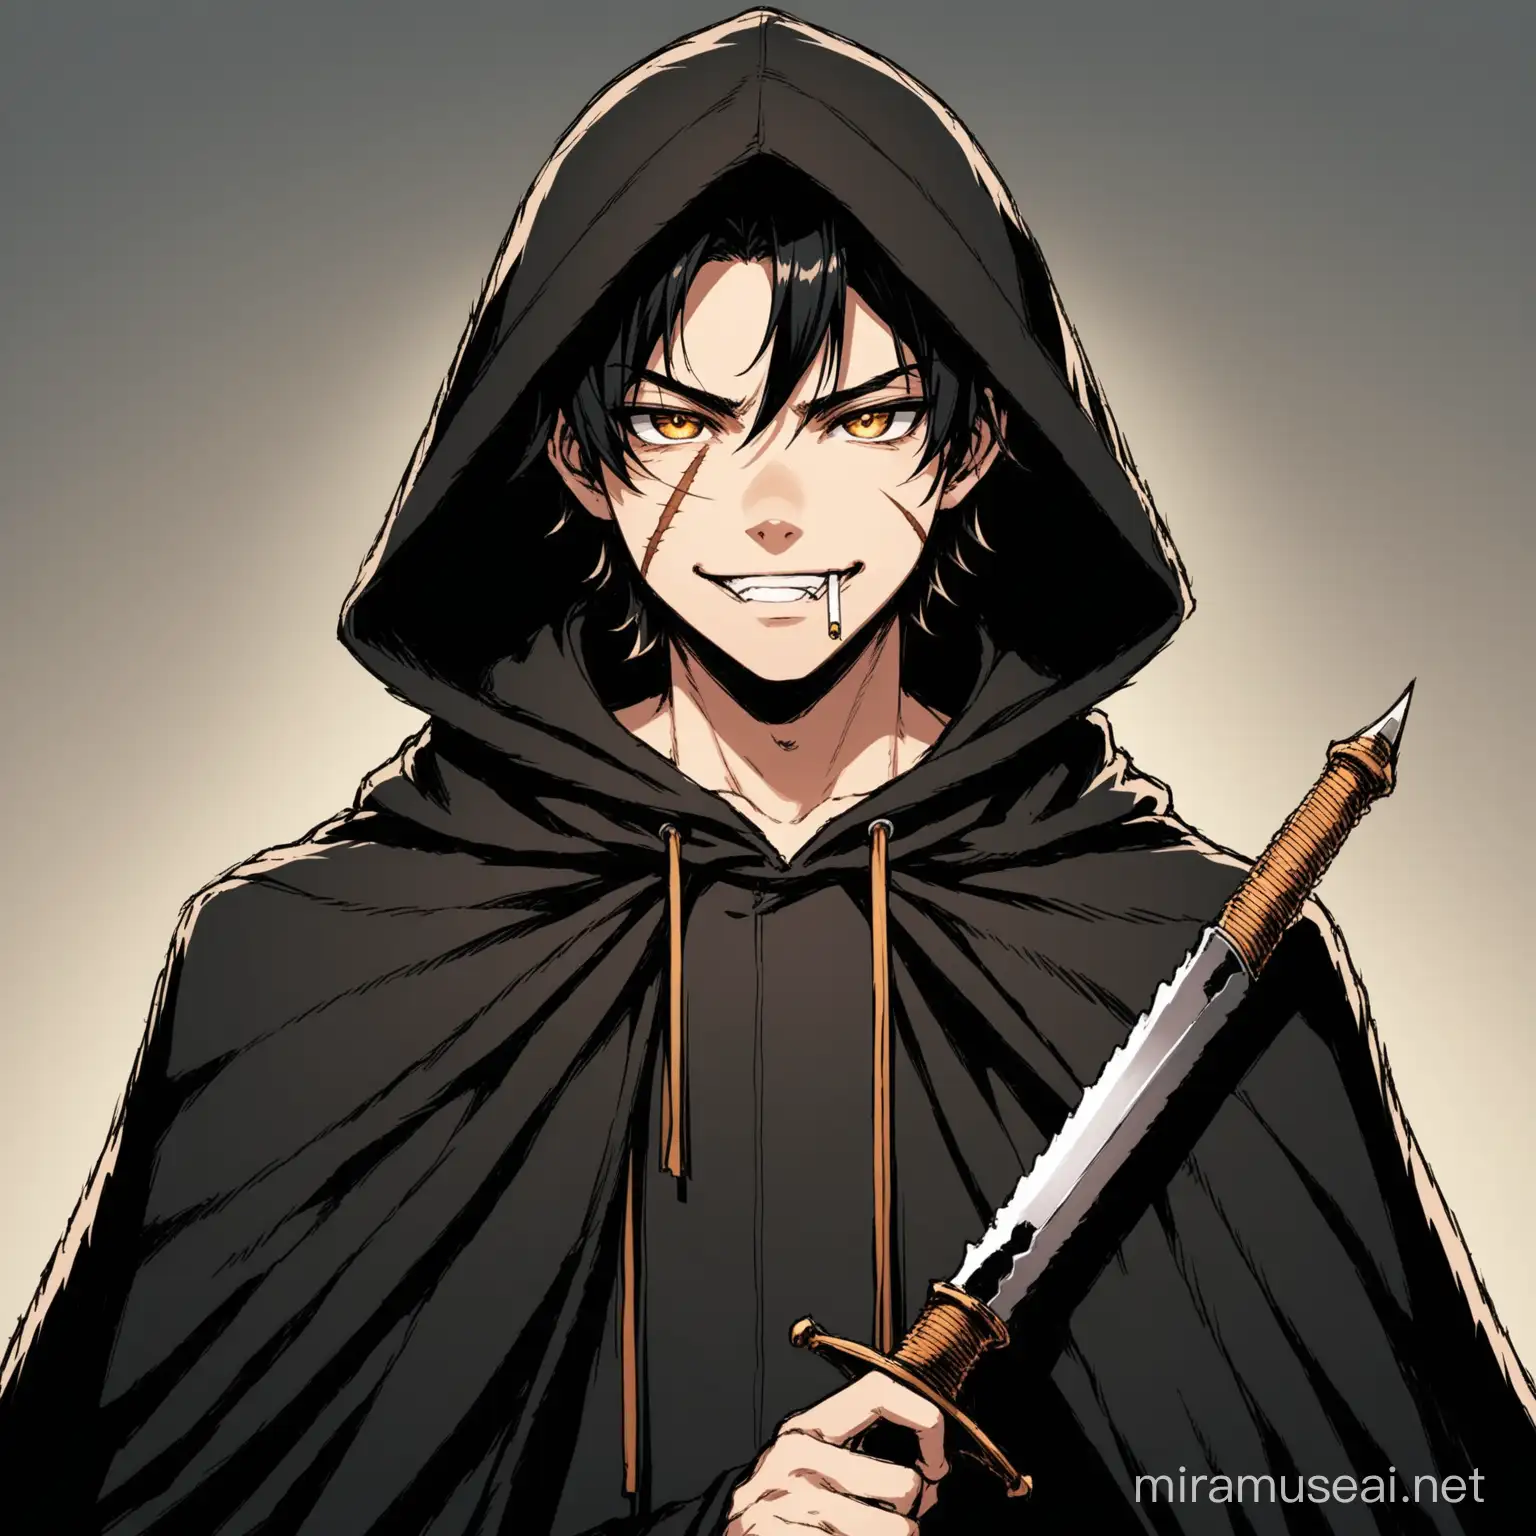 Teenagers male, fair skin and black hair, deep eyes, wears a black cape similar to a hooded coat, wears rogue clothes, has a cigarette in his mouth and a scar on his eye, has honey brown eyes, his face has a sarcastic expression smile, holds two black daggers